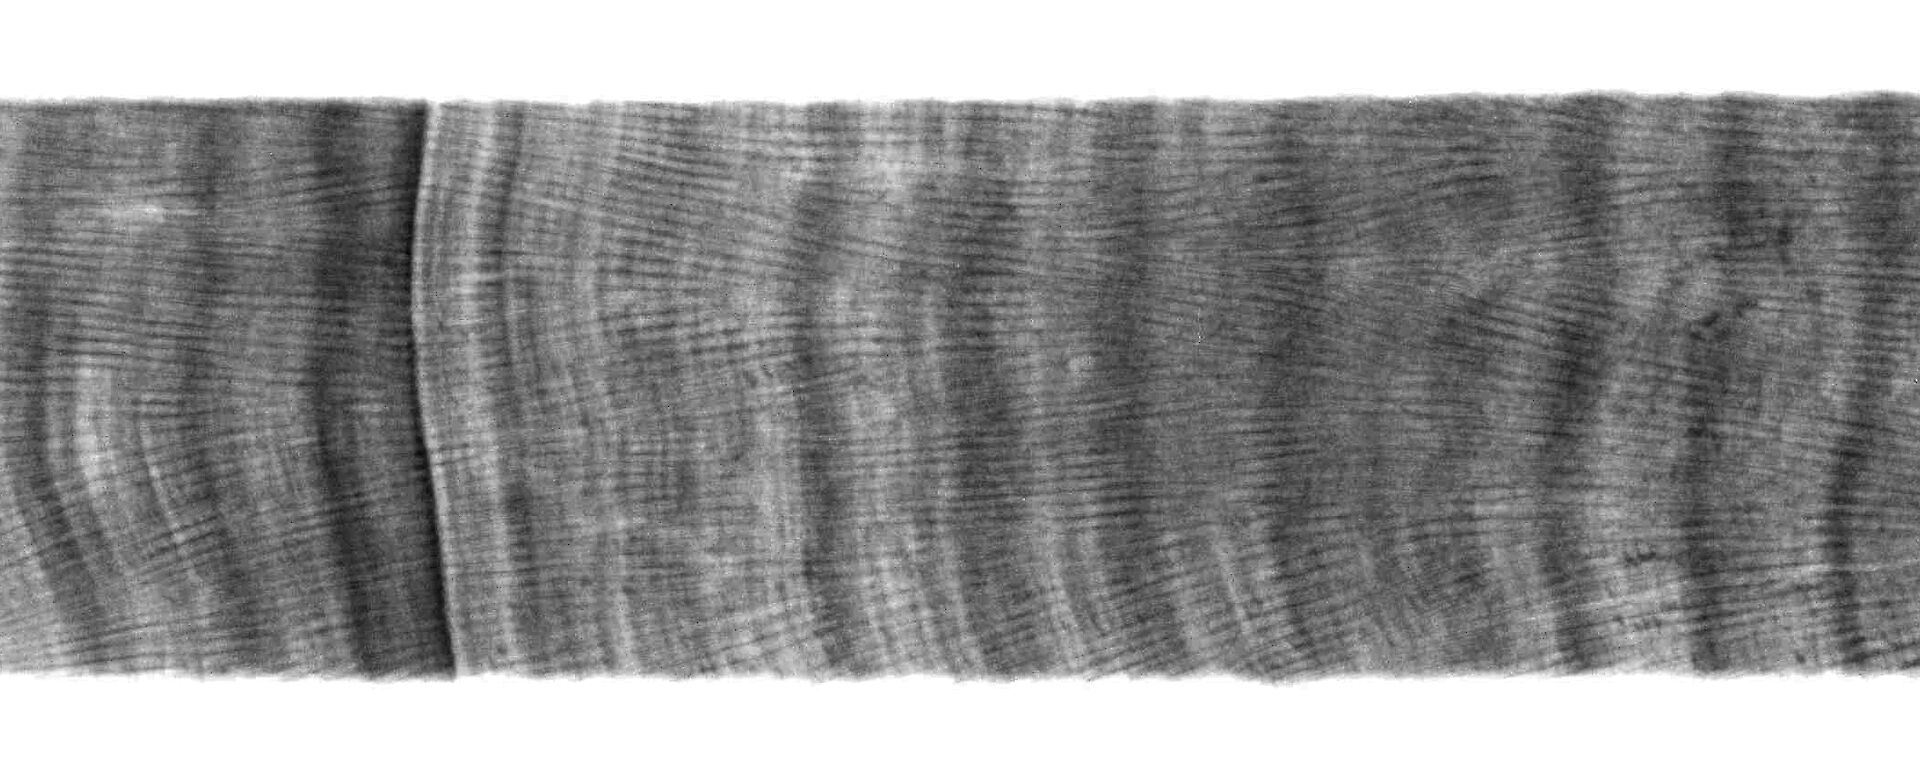 A positive print of an X-ray of a coral slice showing the annual density banding pattern.